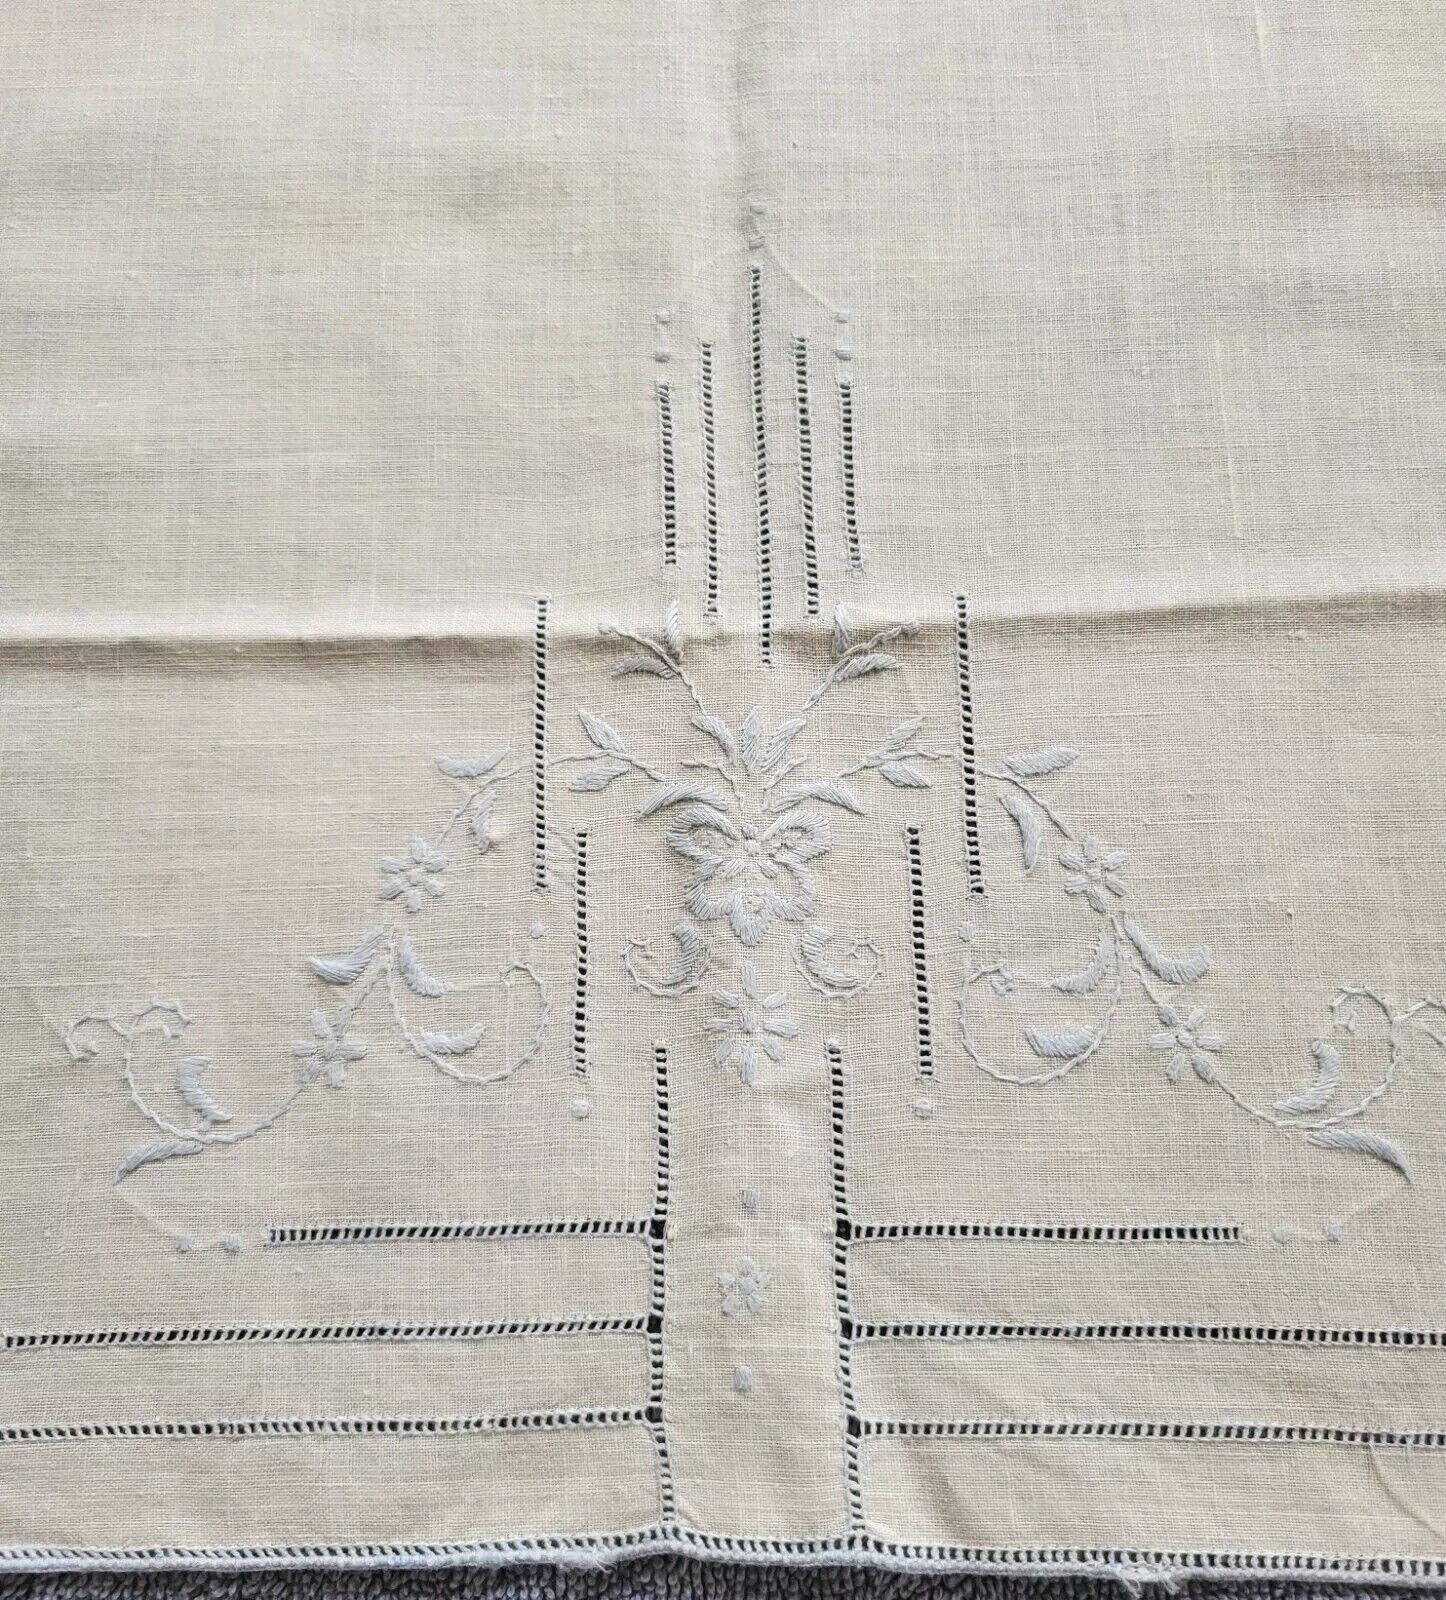 Antique Linen Runner Hand Embroidered Textile Light Blue Floral and Open Work